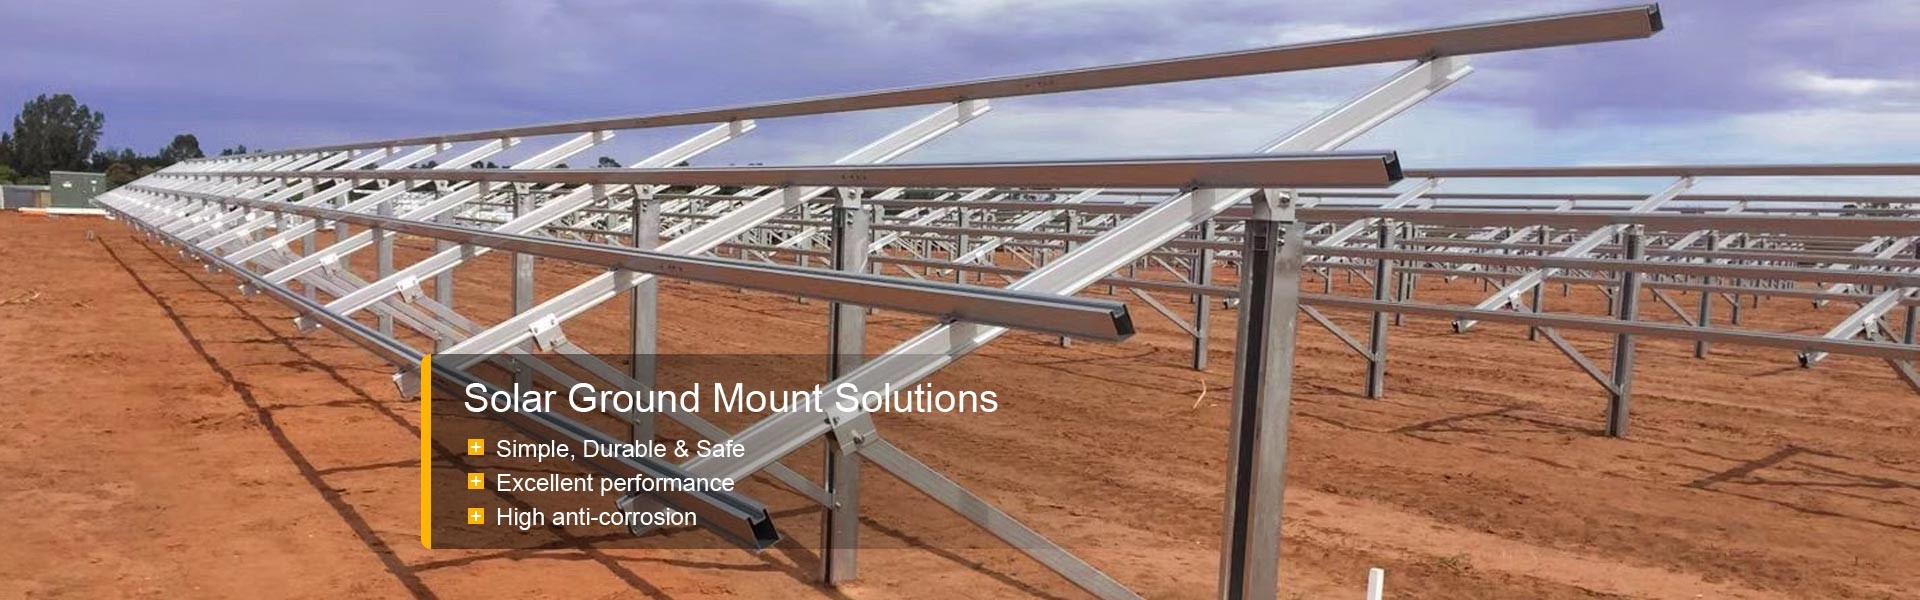 Solar Ground Mount Solutions